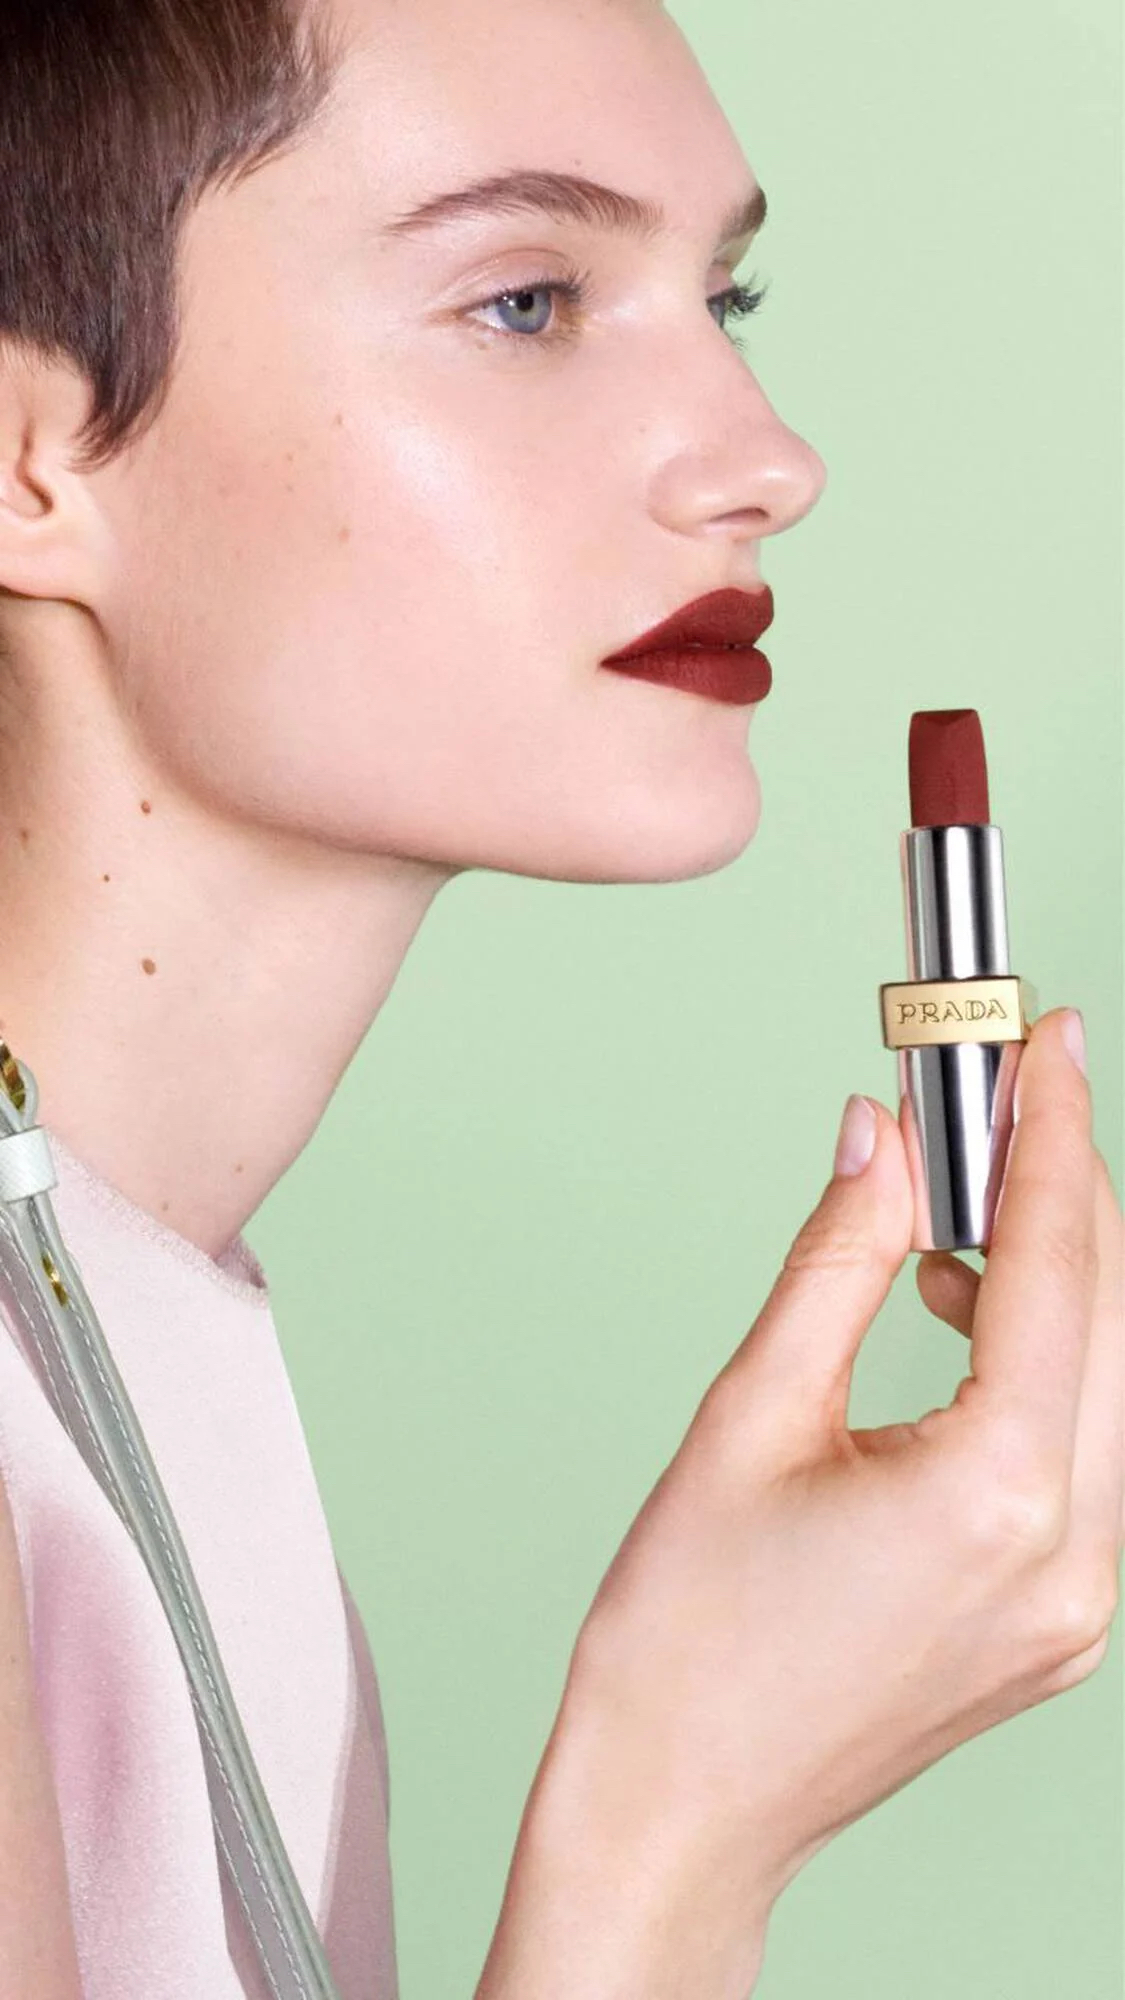 Prada Beauty Has Arrived – Here's What You Need To Know